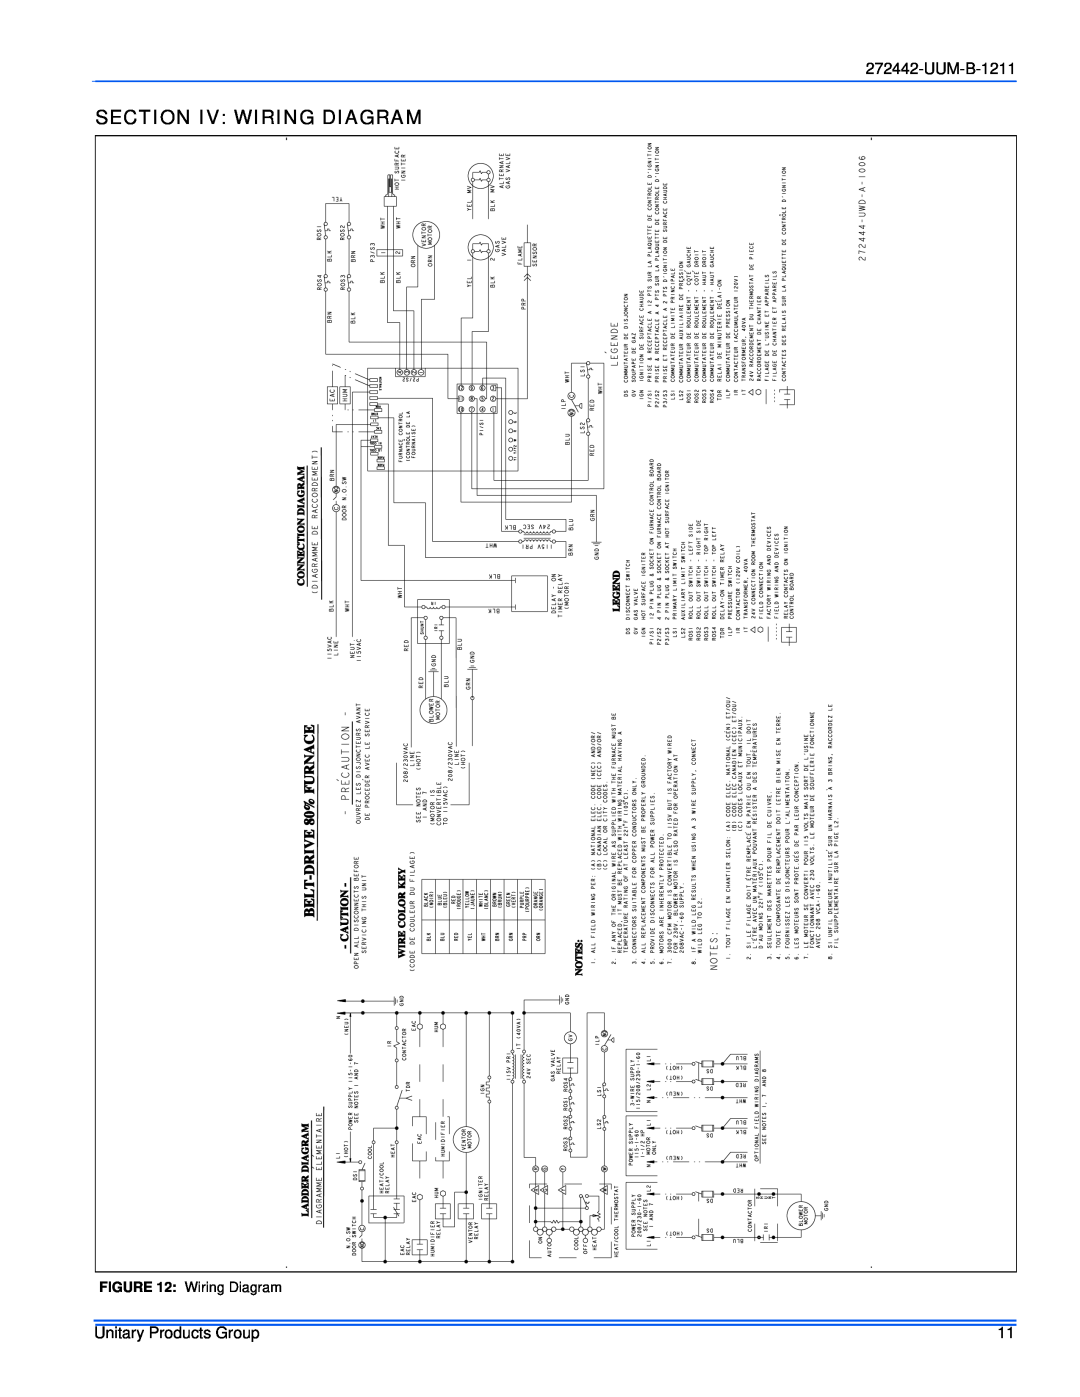 York GY8S160E30UH21 service manual Section Iv Wiring Diagram, UUM-B-1211, Unitary Products Group 